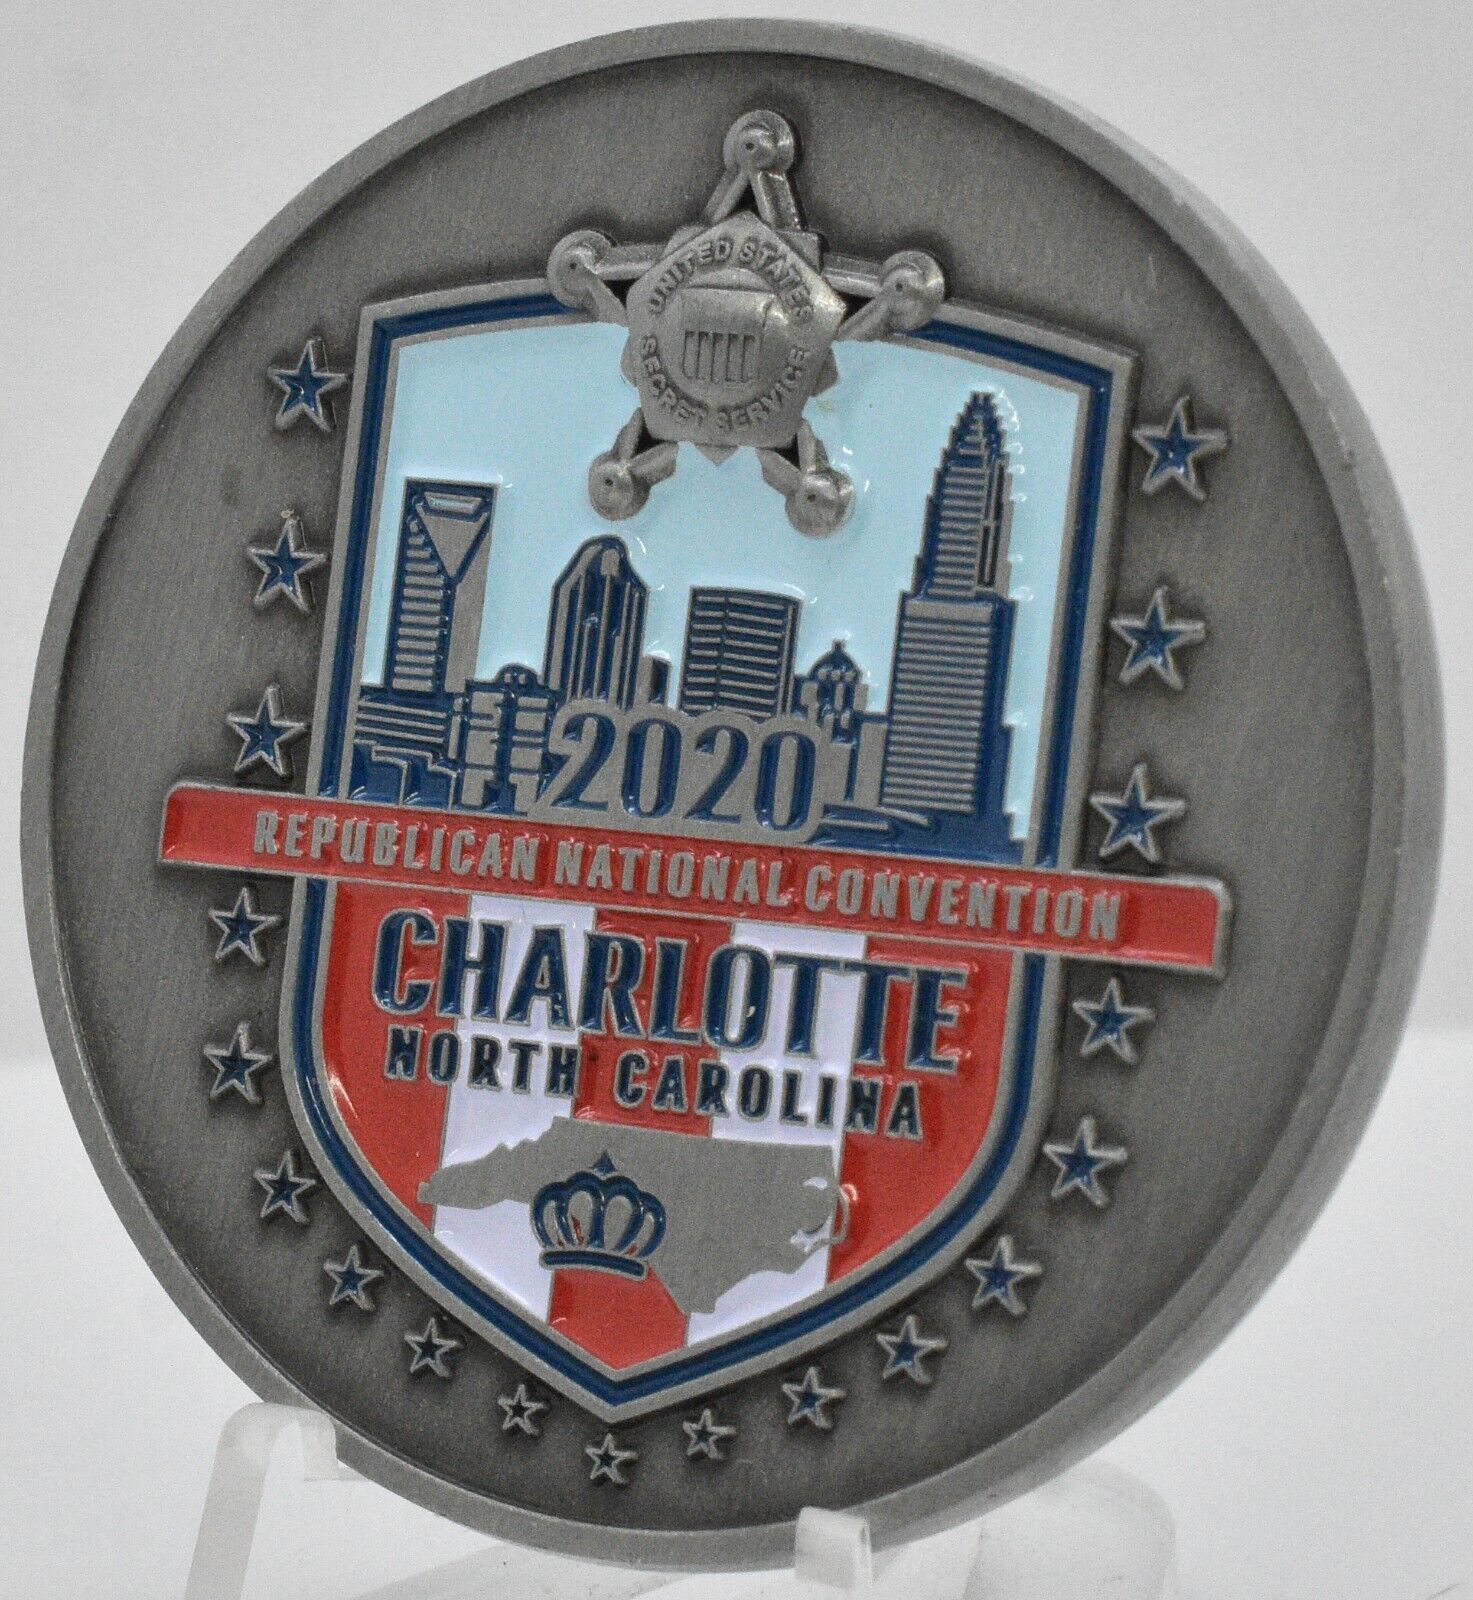 2020 Republican National Convention Donald Trump Charlotte RNC Challenge Coin